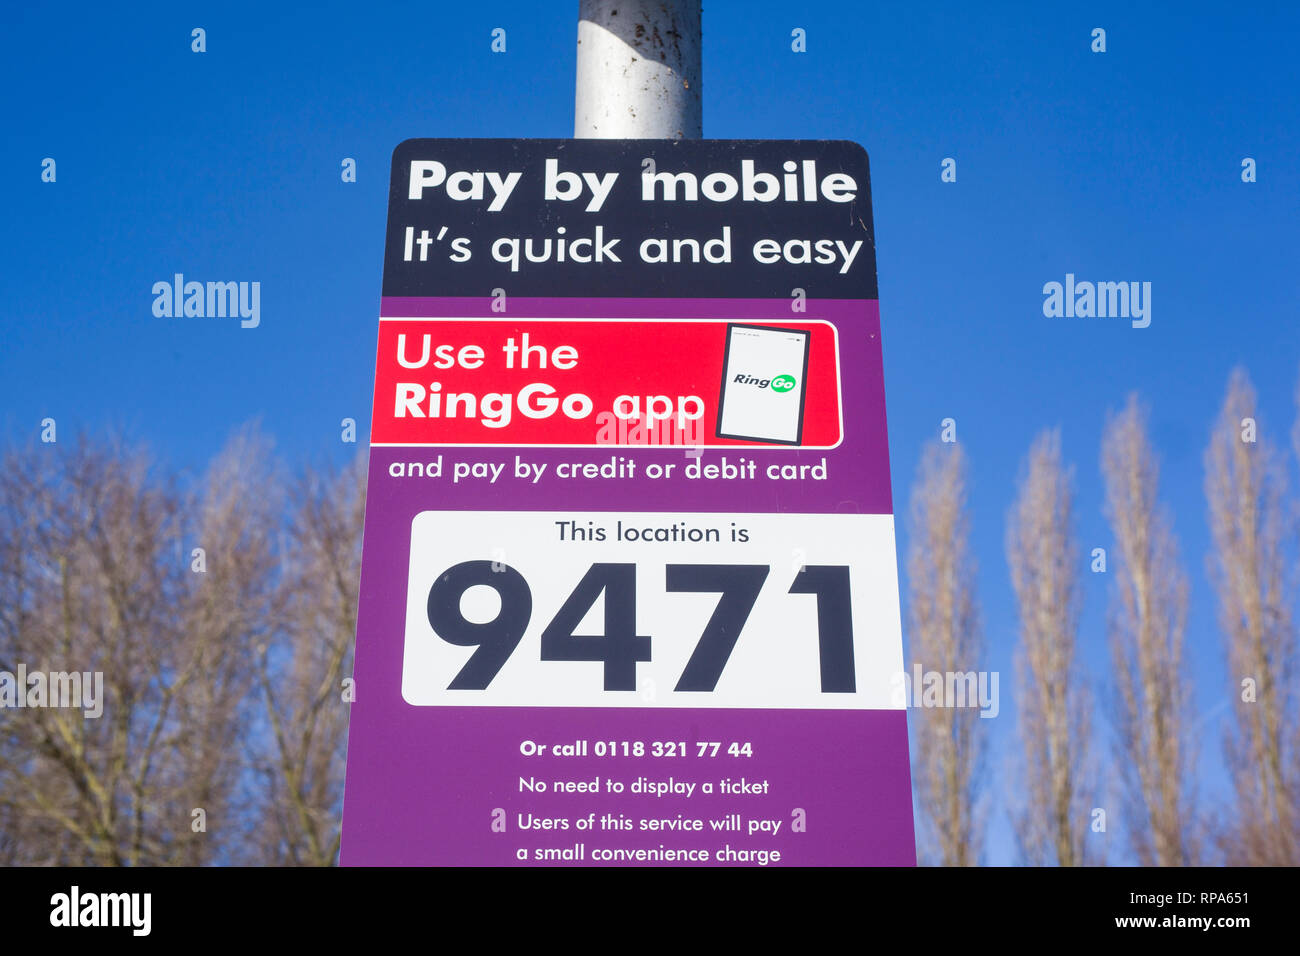 Ringo Parking sign for Pay By Mobile using the Ringo app in Kings Meadows, Reading, Berkshire, Stock Photo